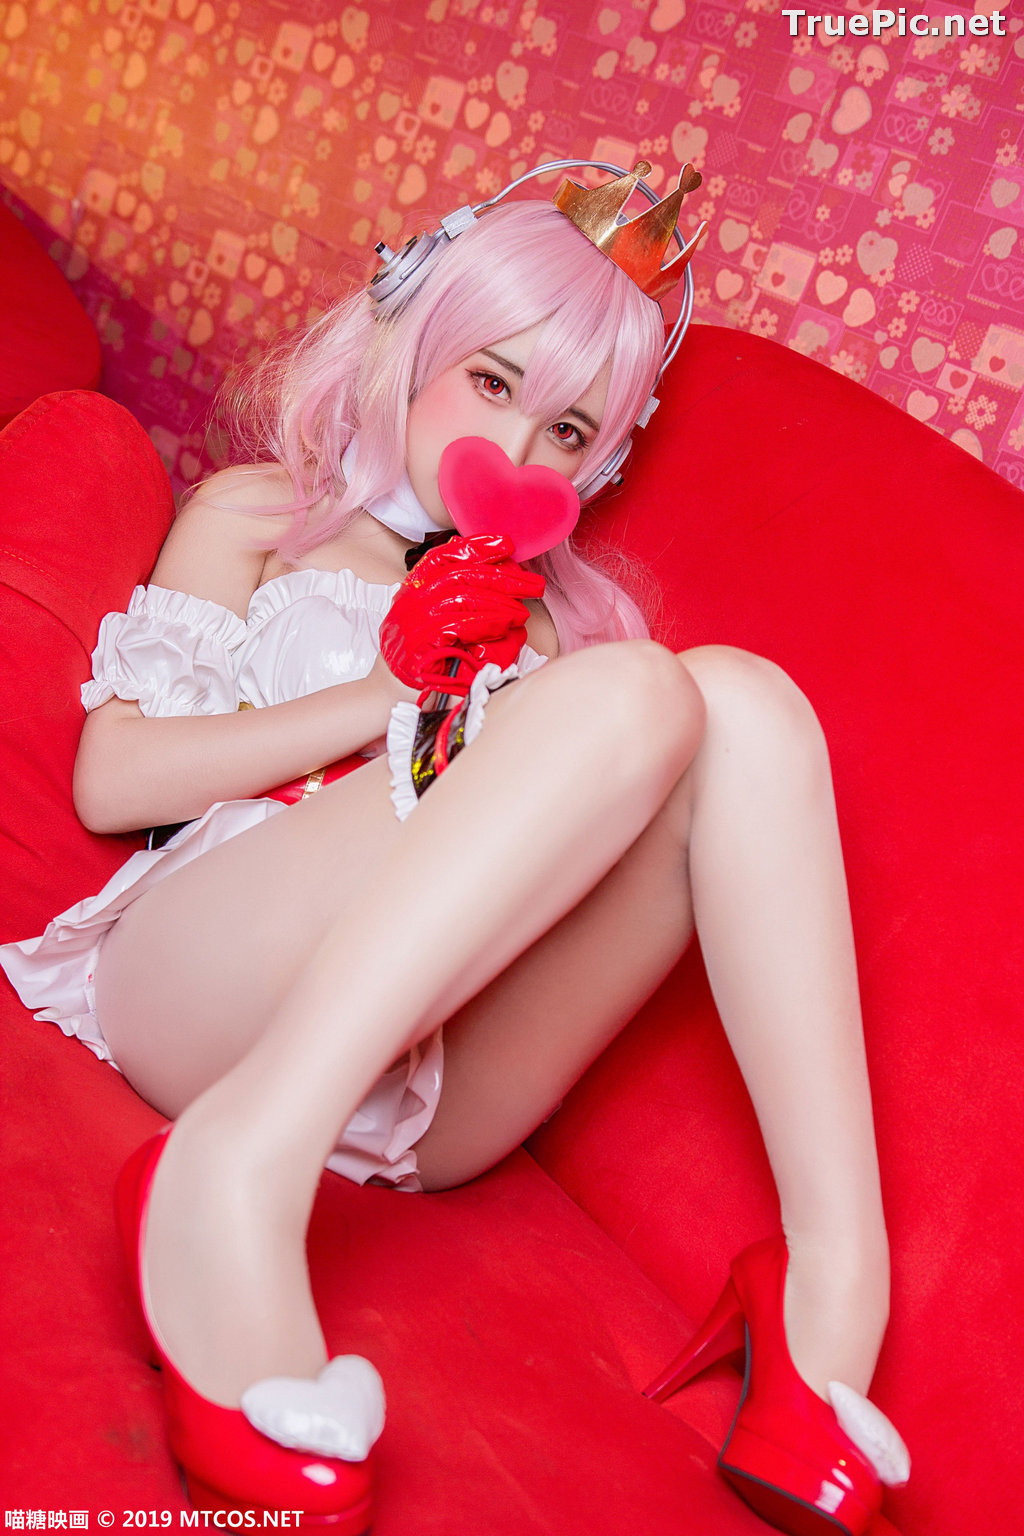 Image [MTCos] 喵糖映画 Vol.050 - Chinese Cute Model - Lovely Pink-haired - TruePic.net - Picture-28